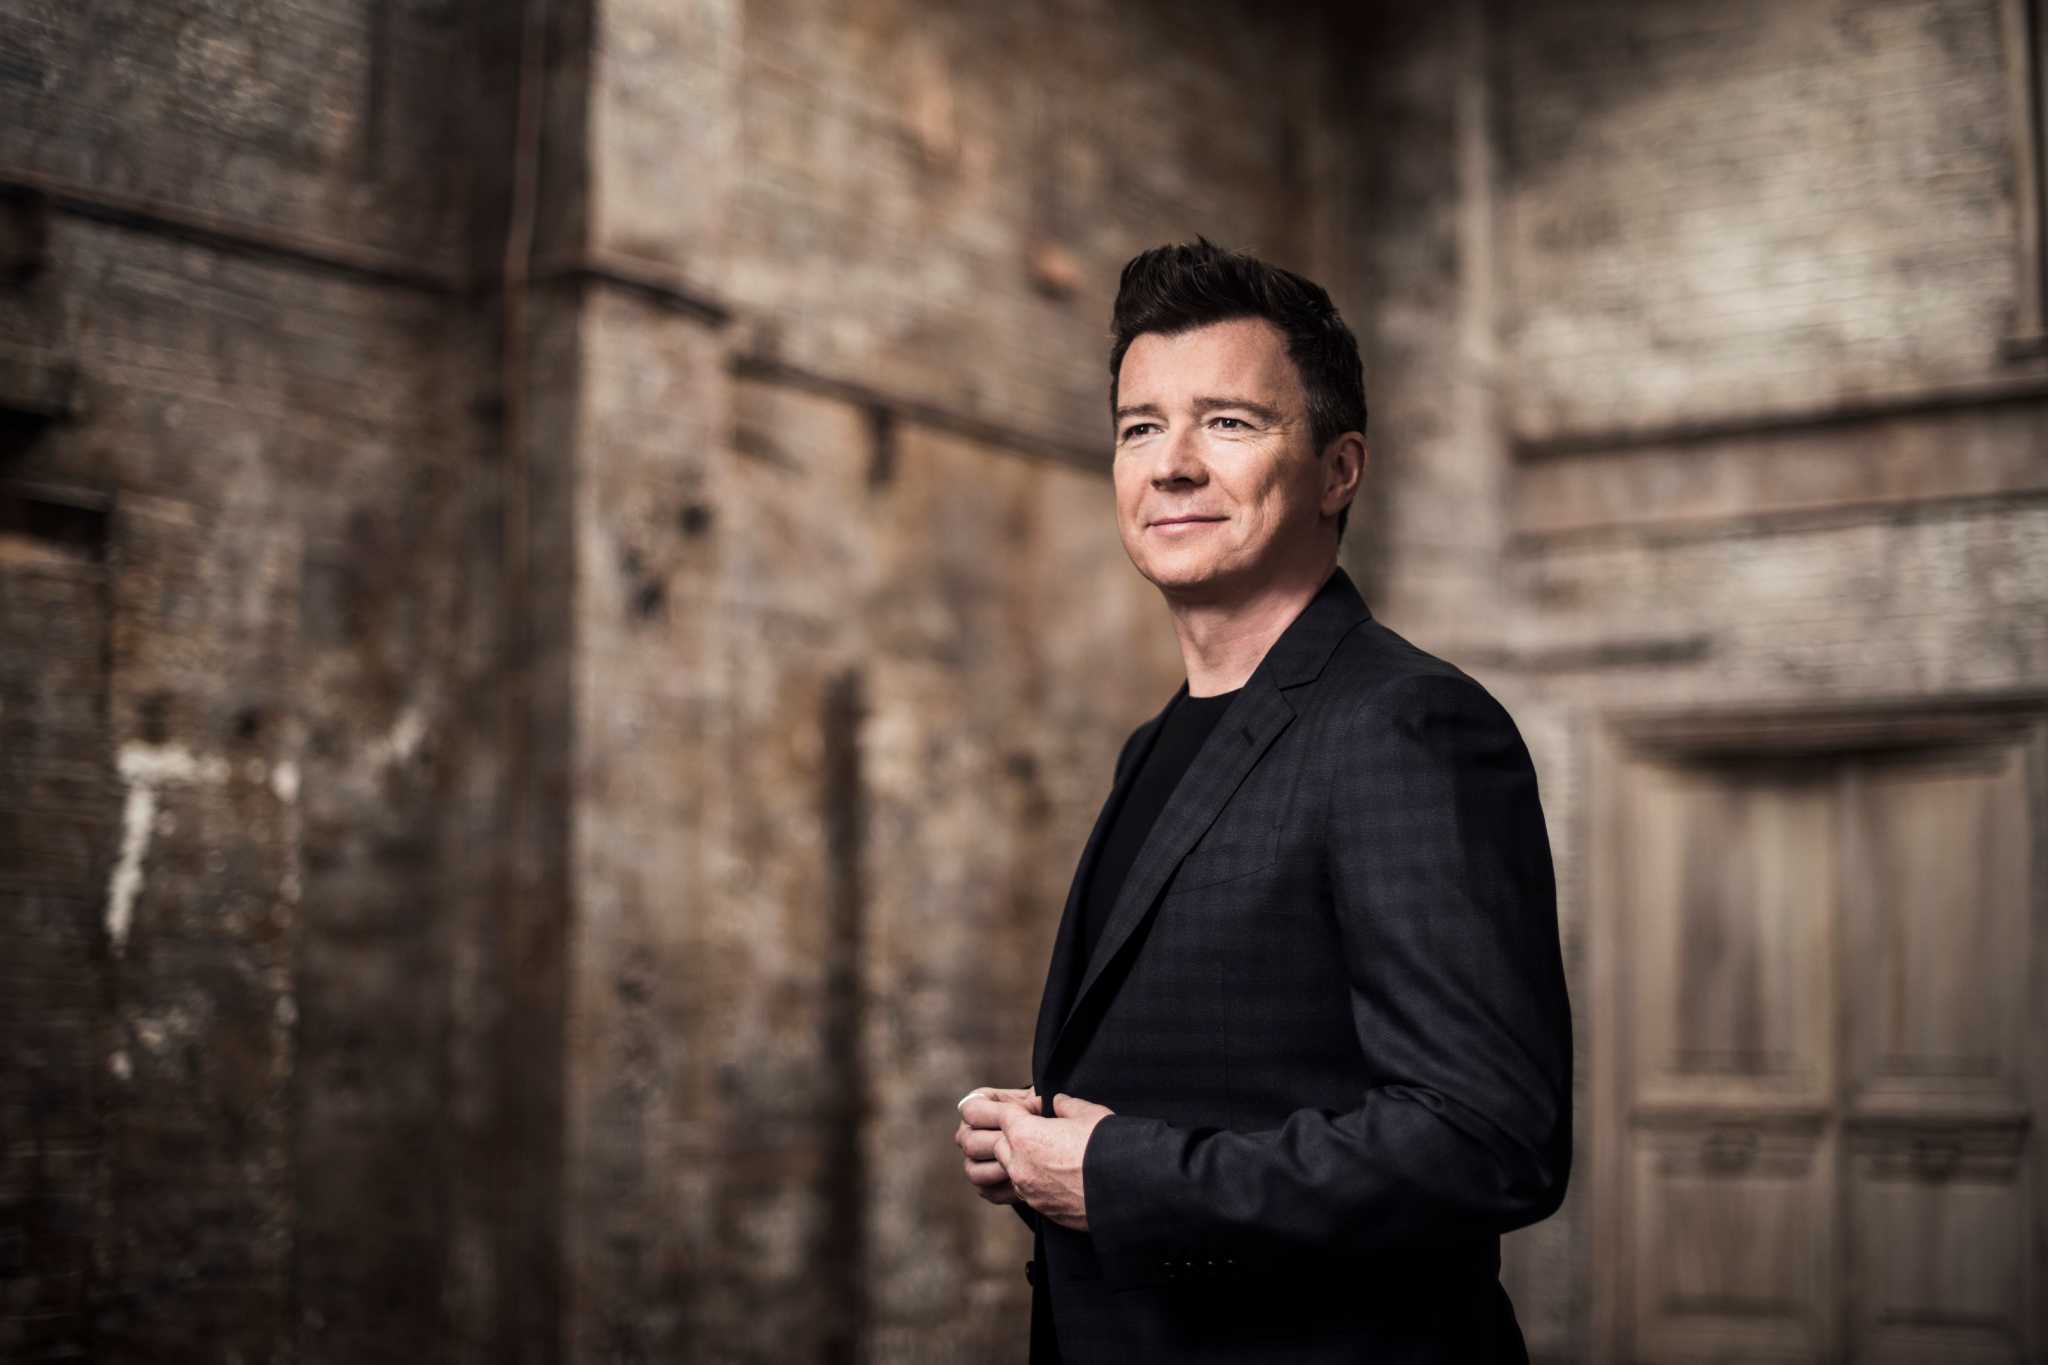 80s pop star Rick Astley is coming to Houston.